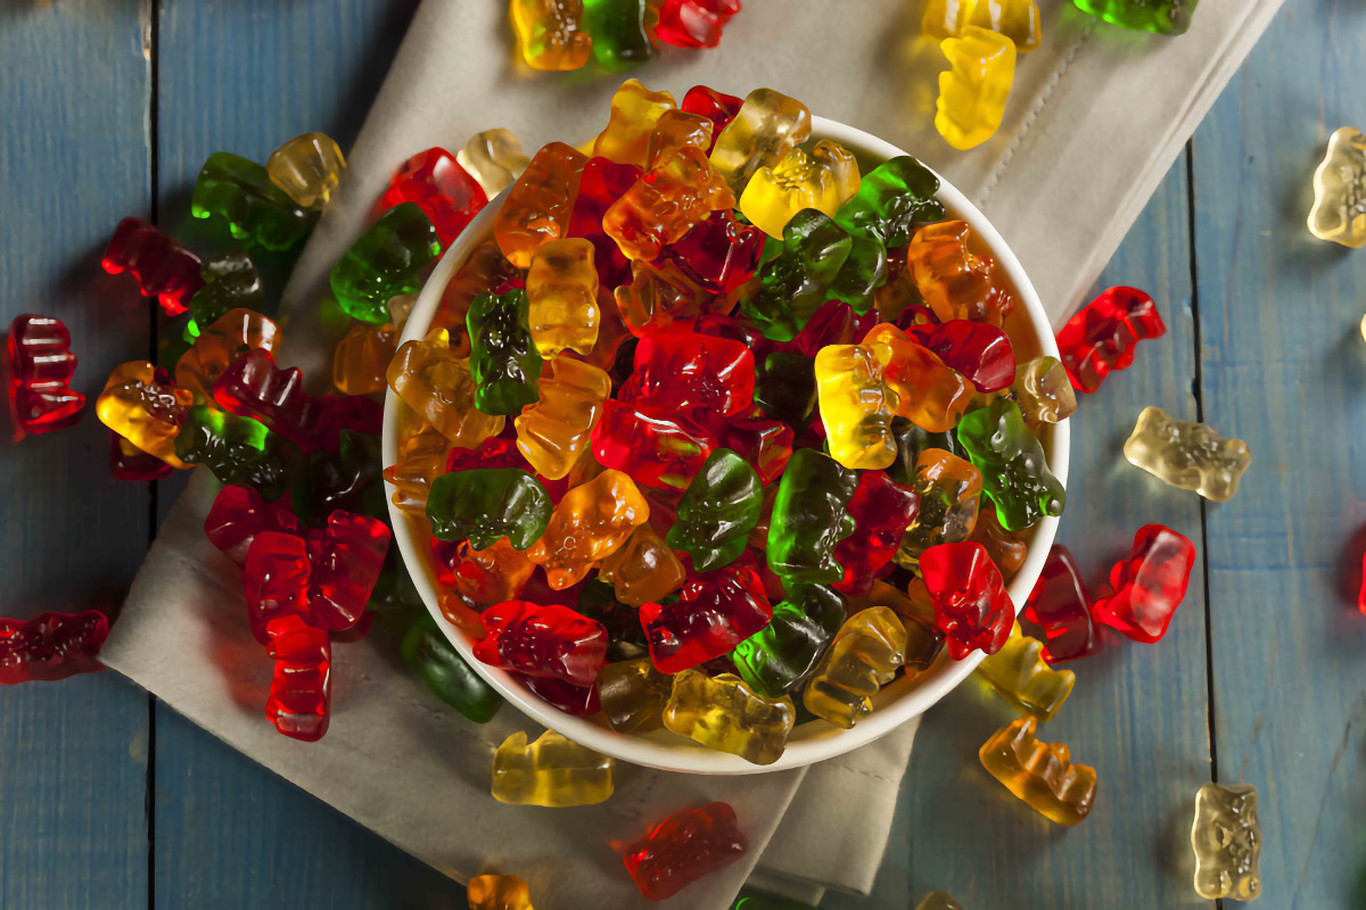 Can you speed up the onset time by increasing the THC gummy dosage?